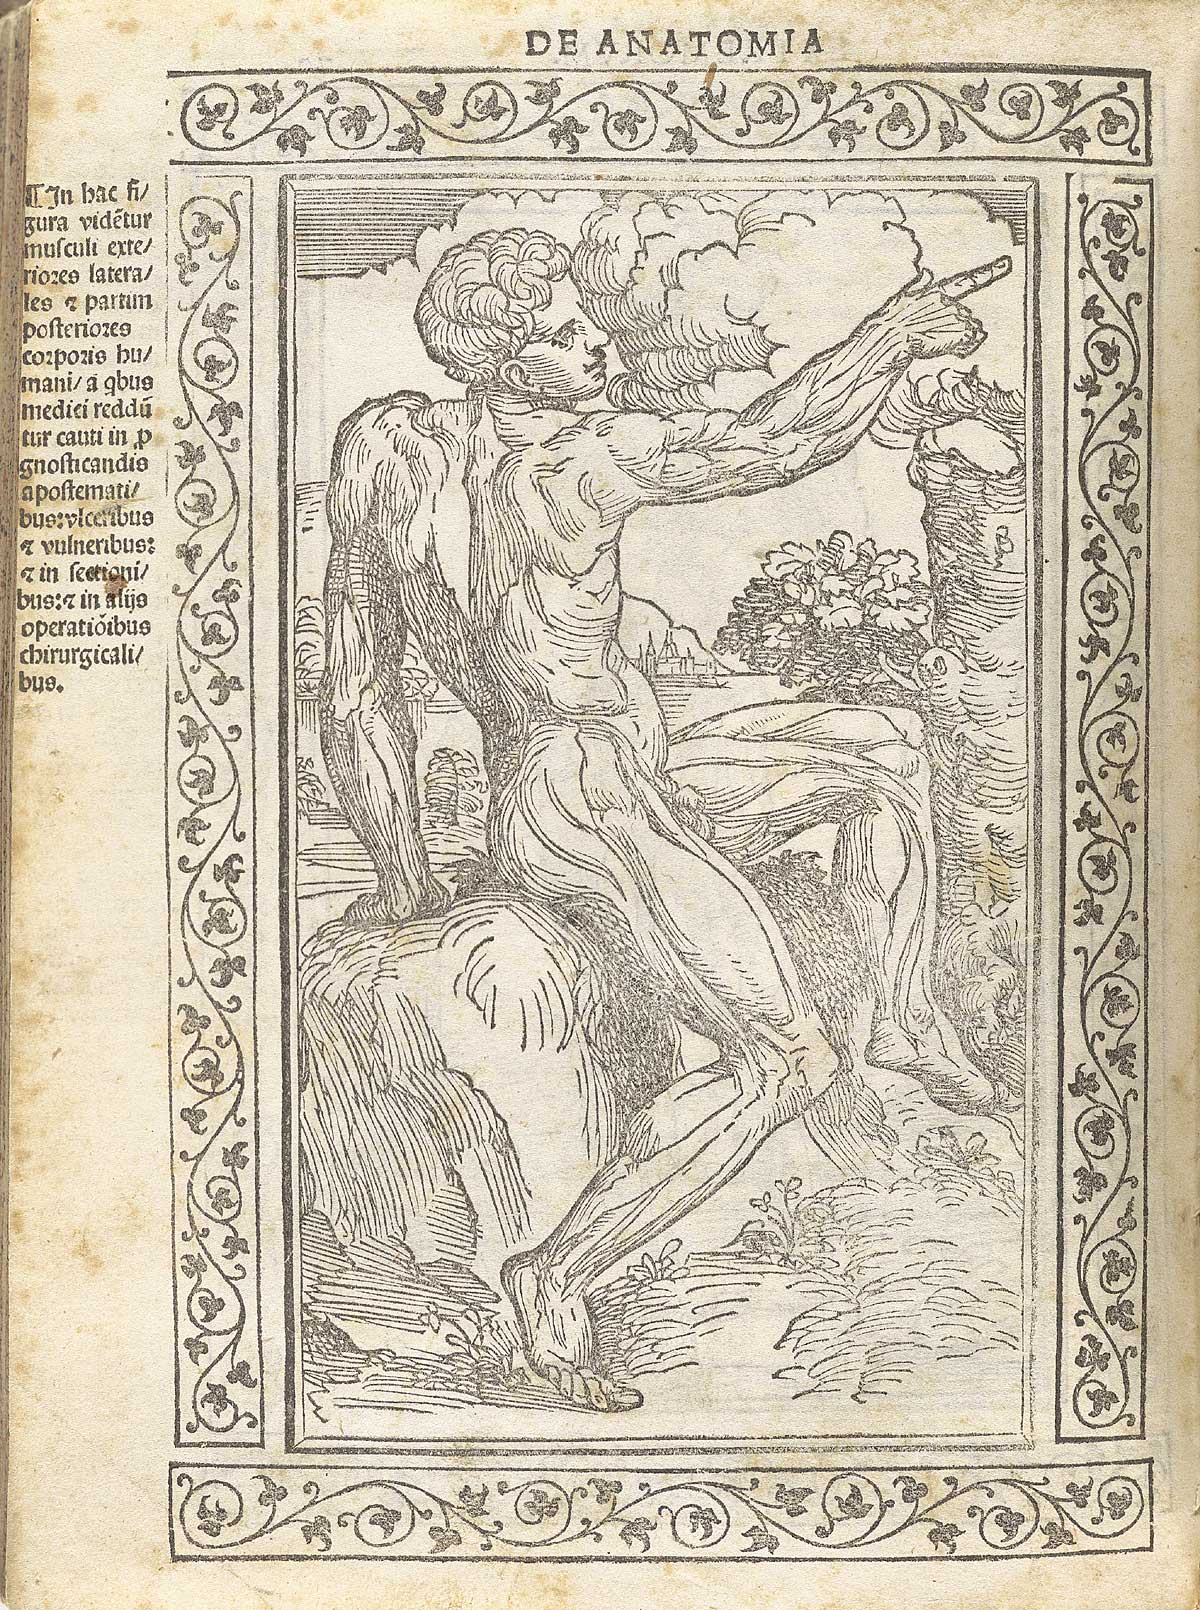 Woodcut nude male figure showing musculature of the upper back and side, seated on a large rock in a pastoral setting with right hand stretched out up; with a woodcut border and text in Latin on the left side of page, from Berengario da Carpi’s Isagogae breues, Bologna, 1523, NLM Call no. WZ 240 B488i 1523.